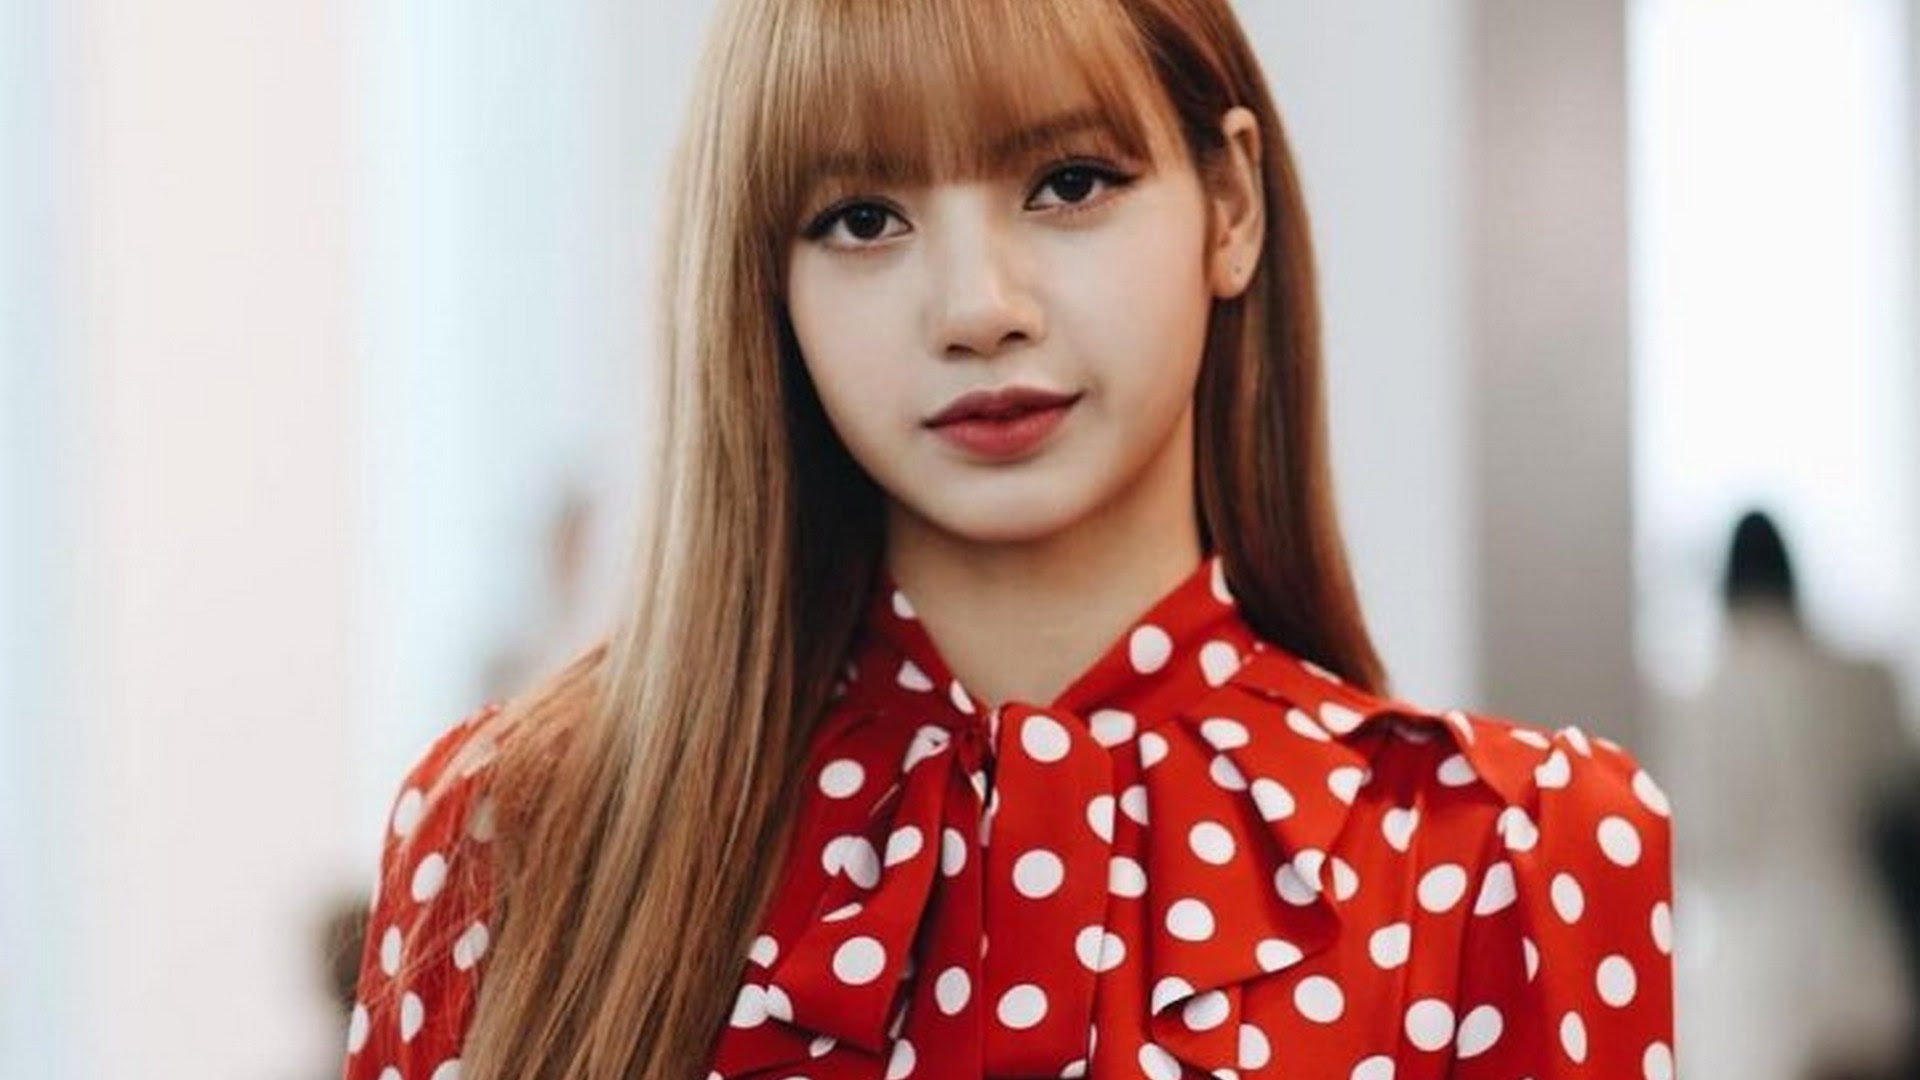 Perfect screen background display for desktop, iphone, pc, laptop, computer, android phone, smartphone, imac, macbook, tablet, mobile device. Top 45 Lisa Blackpink Wallpapers 4k Hd